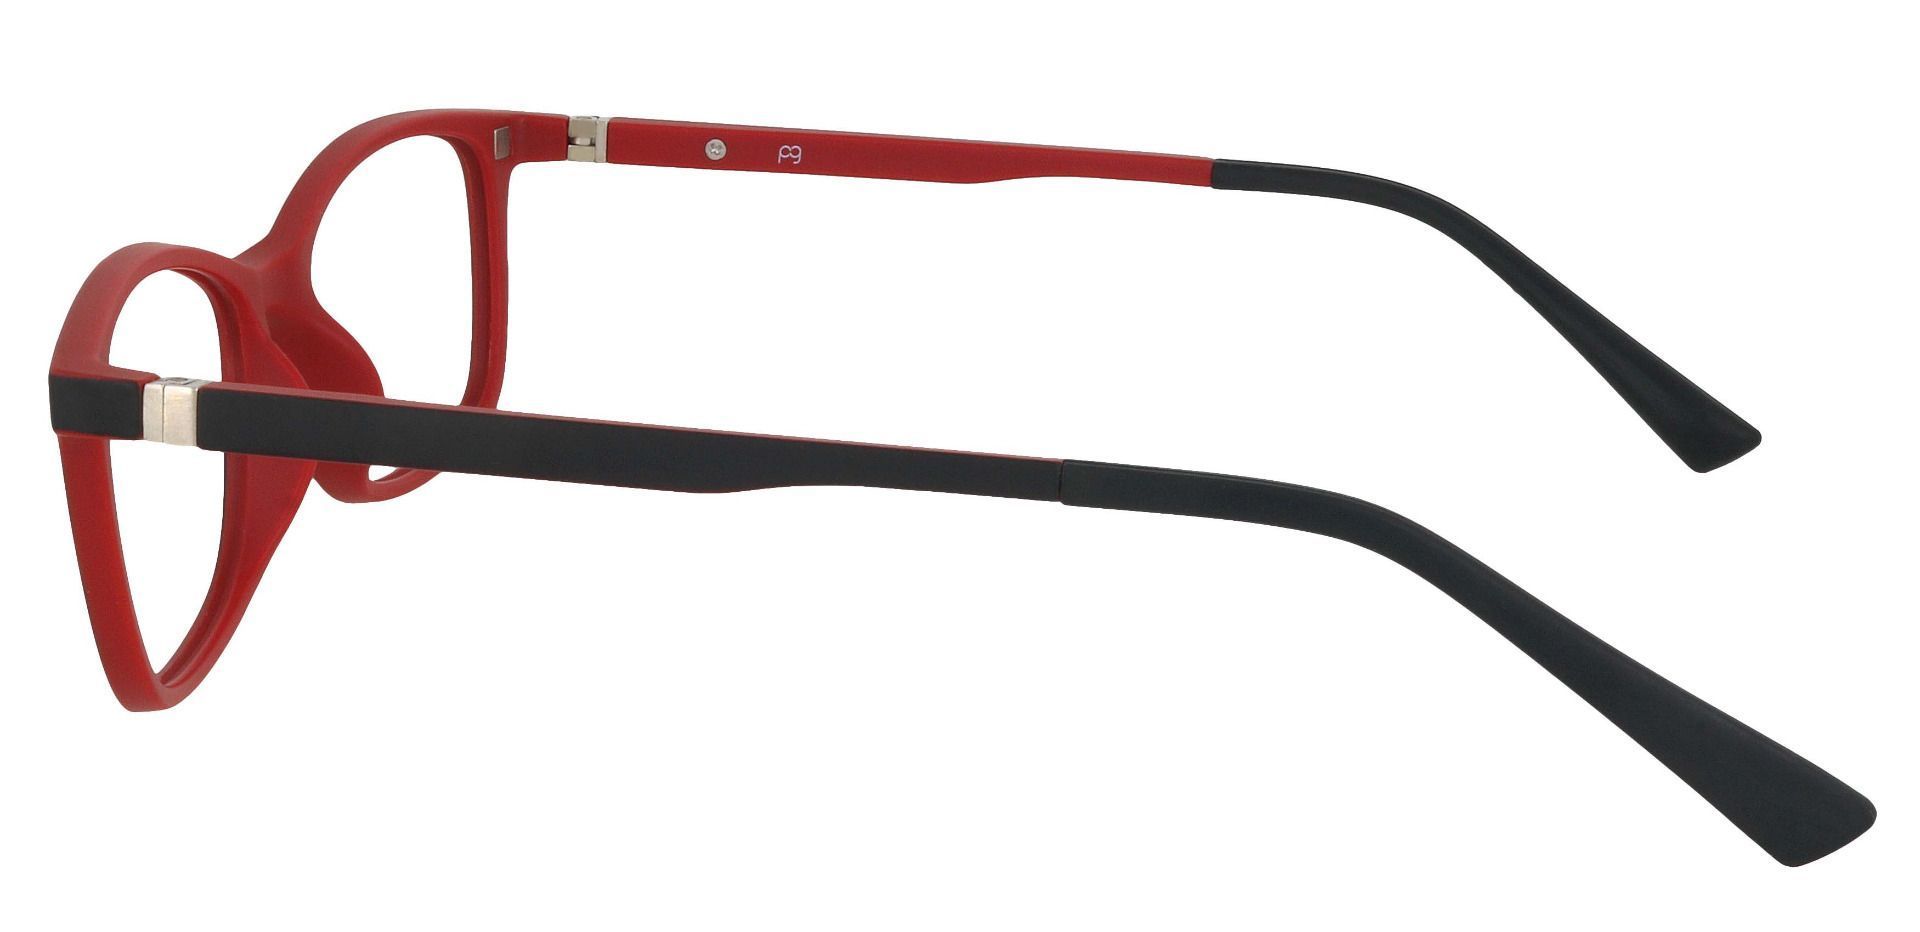 Segura Oval Lined Bifocal Glasses - Red